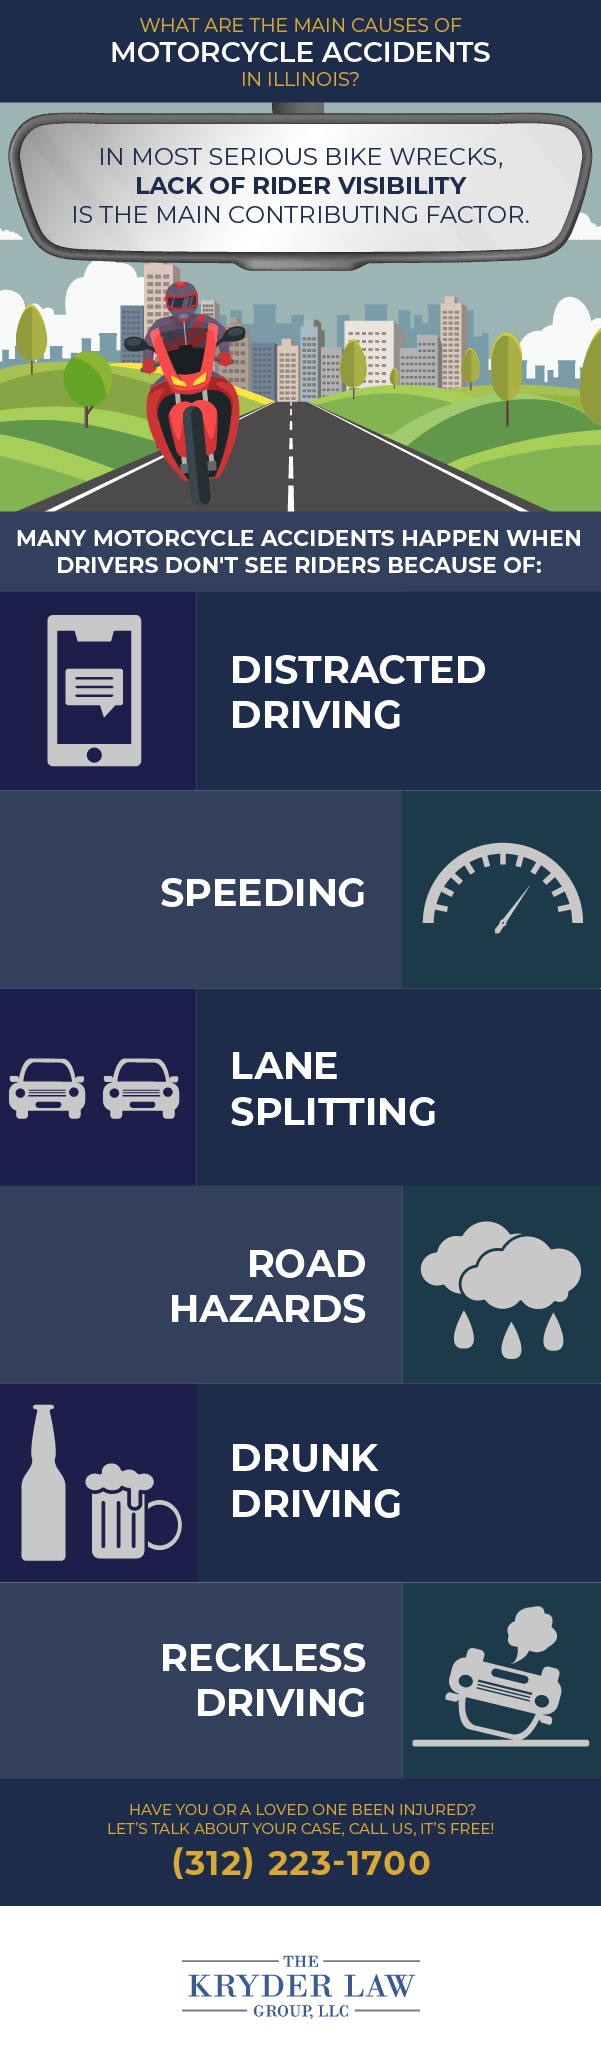 What Are the Main Causes of Motorcycle Accidents Infographic